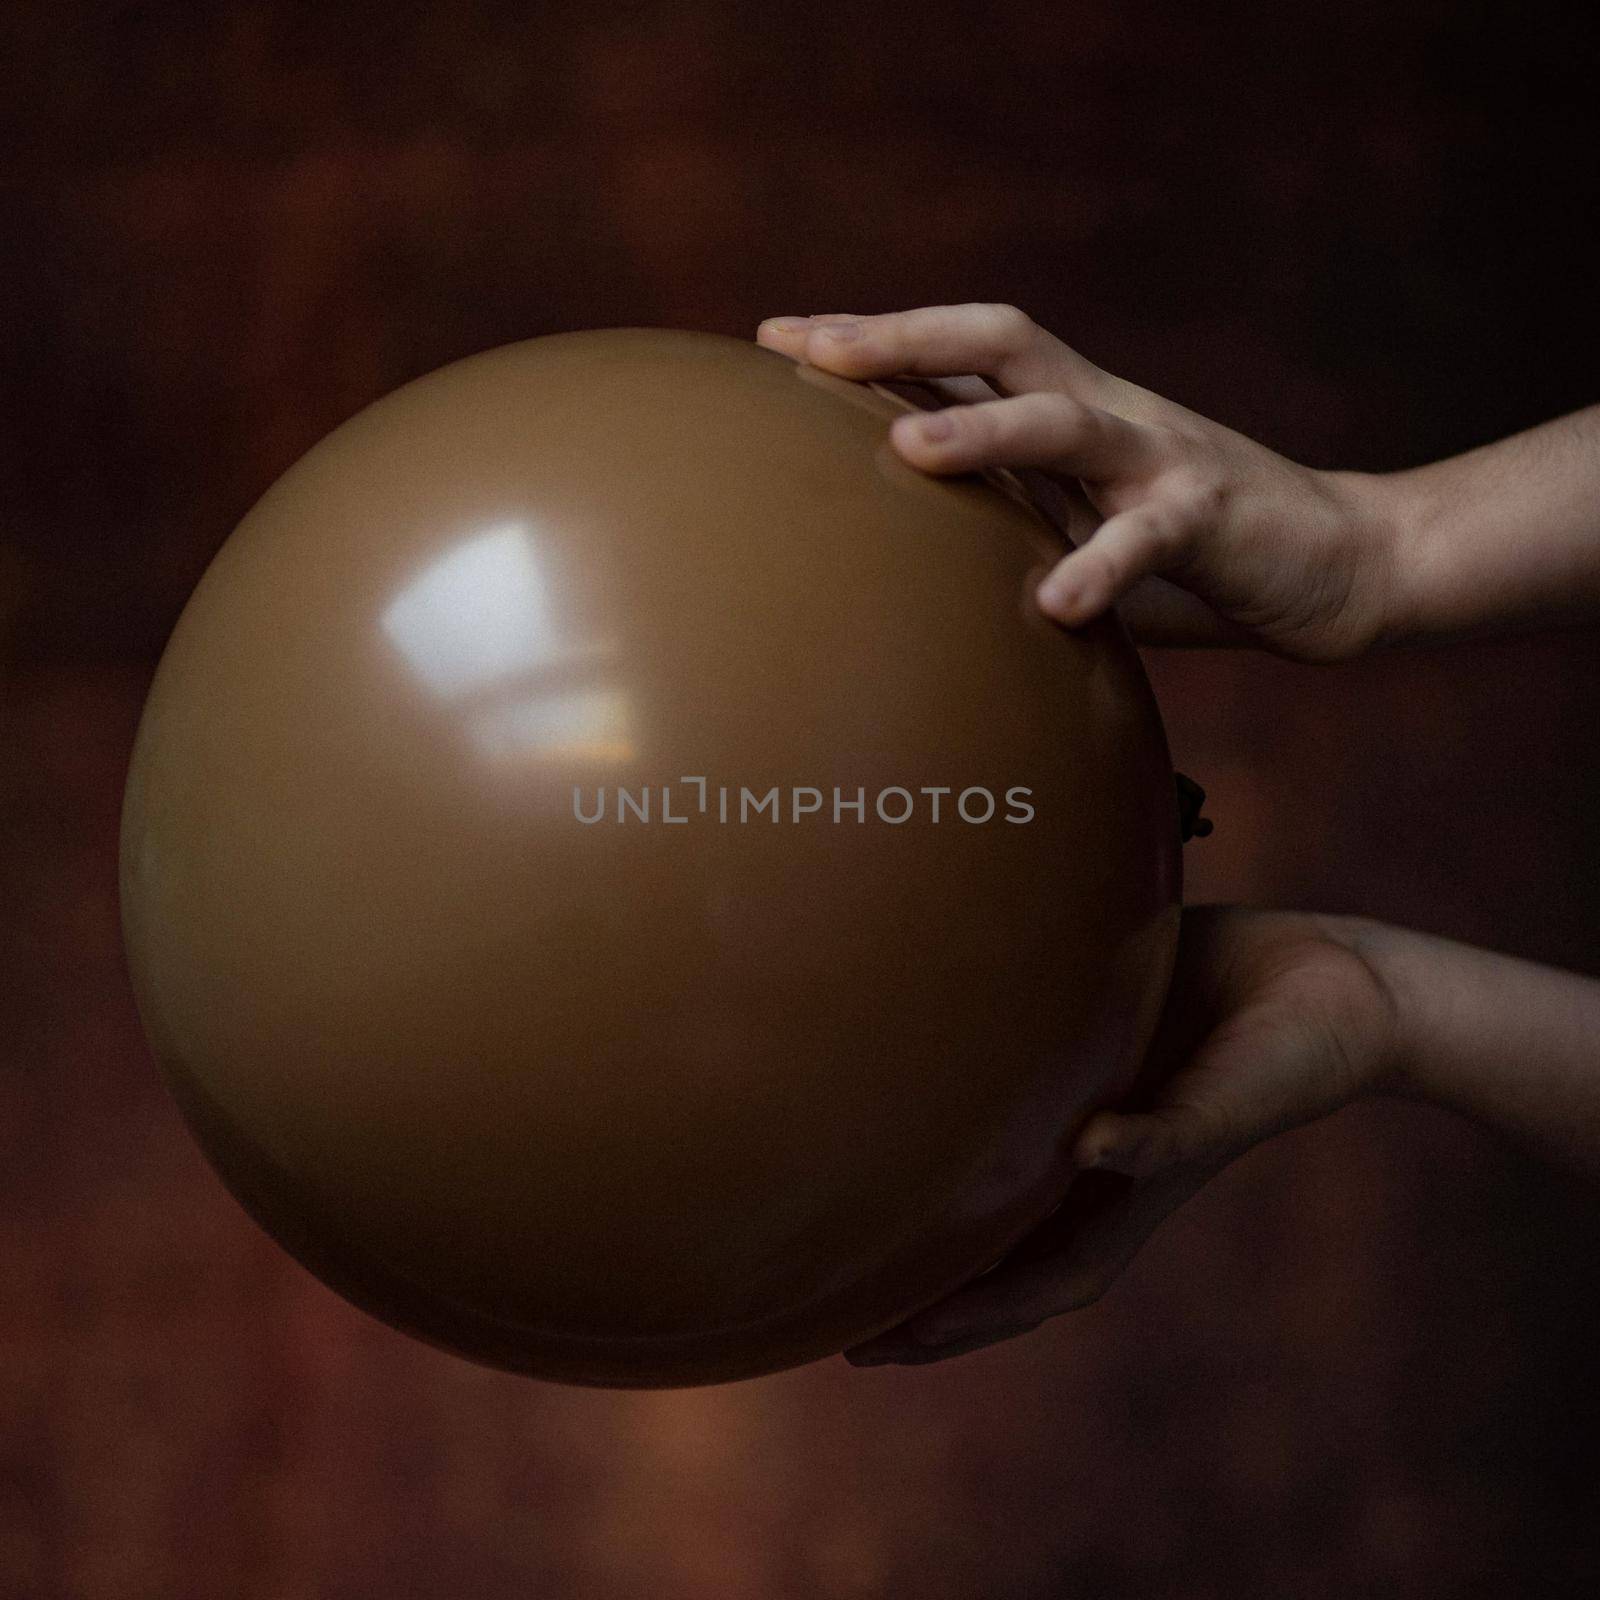 children's toys are diverse fantasies and dreams take the child's imagination into fantastic unreal game worlds in the photo the girl's hands are holding a brown balloon. High quality photo